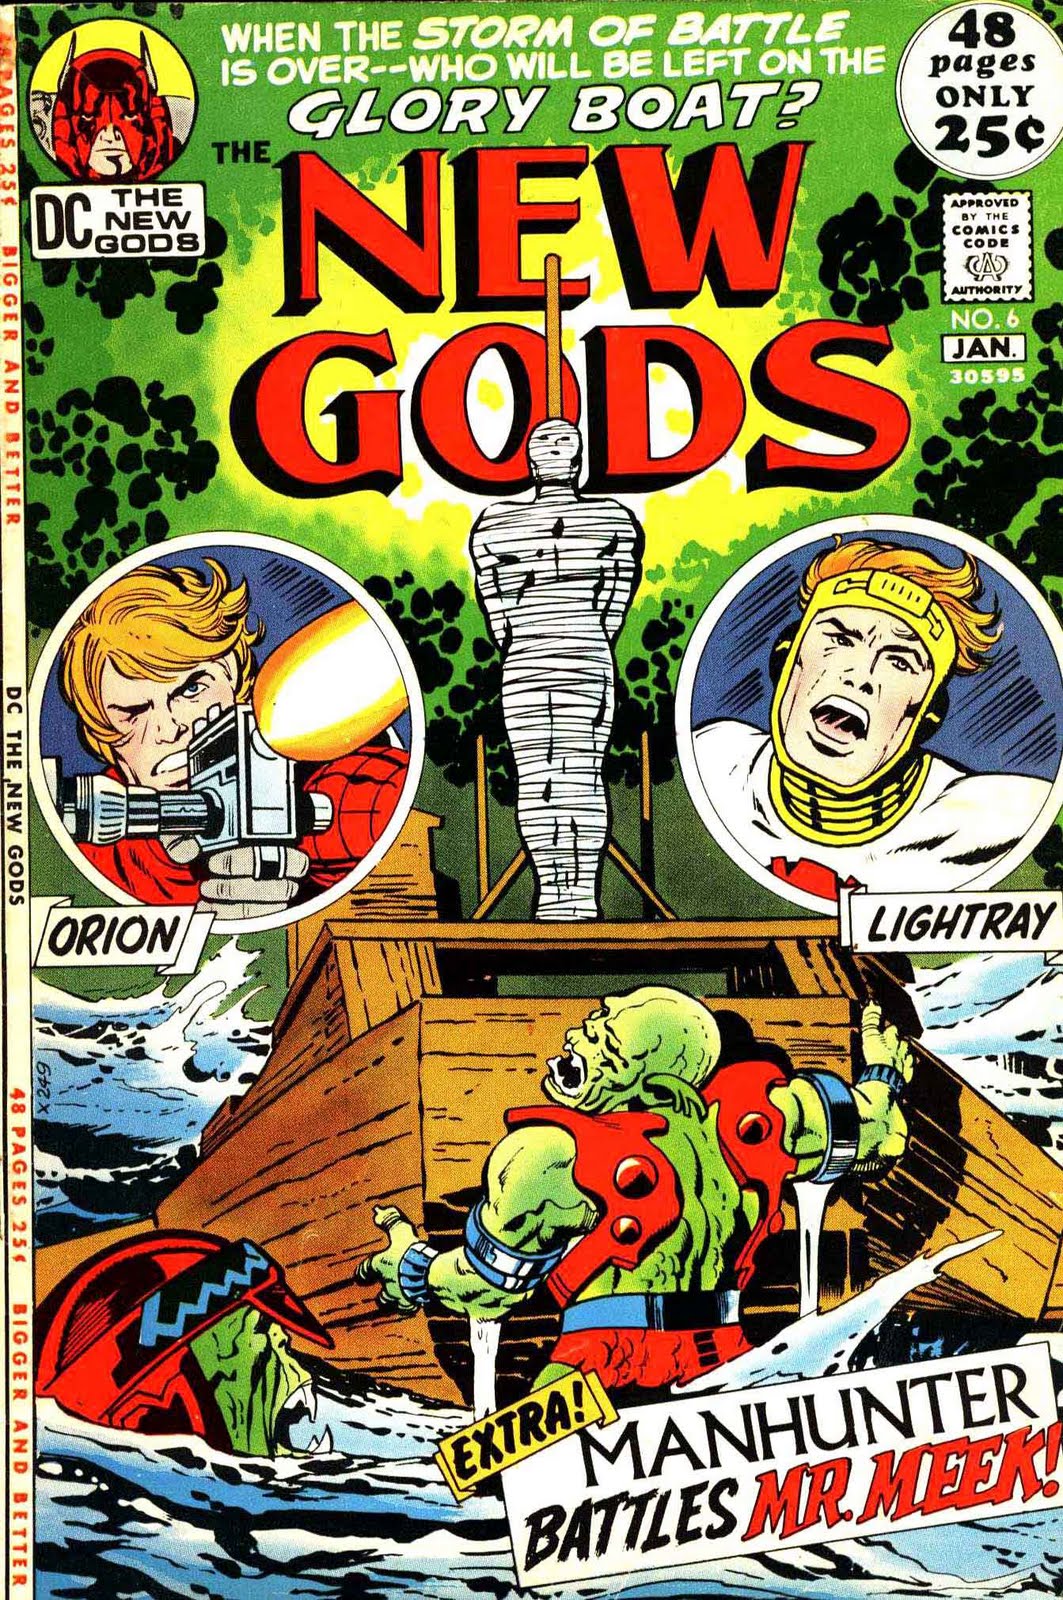 New Gods v1 #6 dc bronze age comic book cover art by Jack Kirby